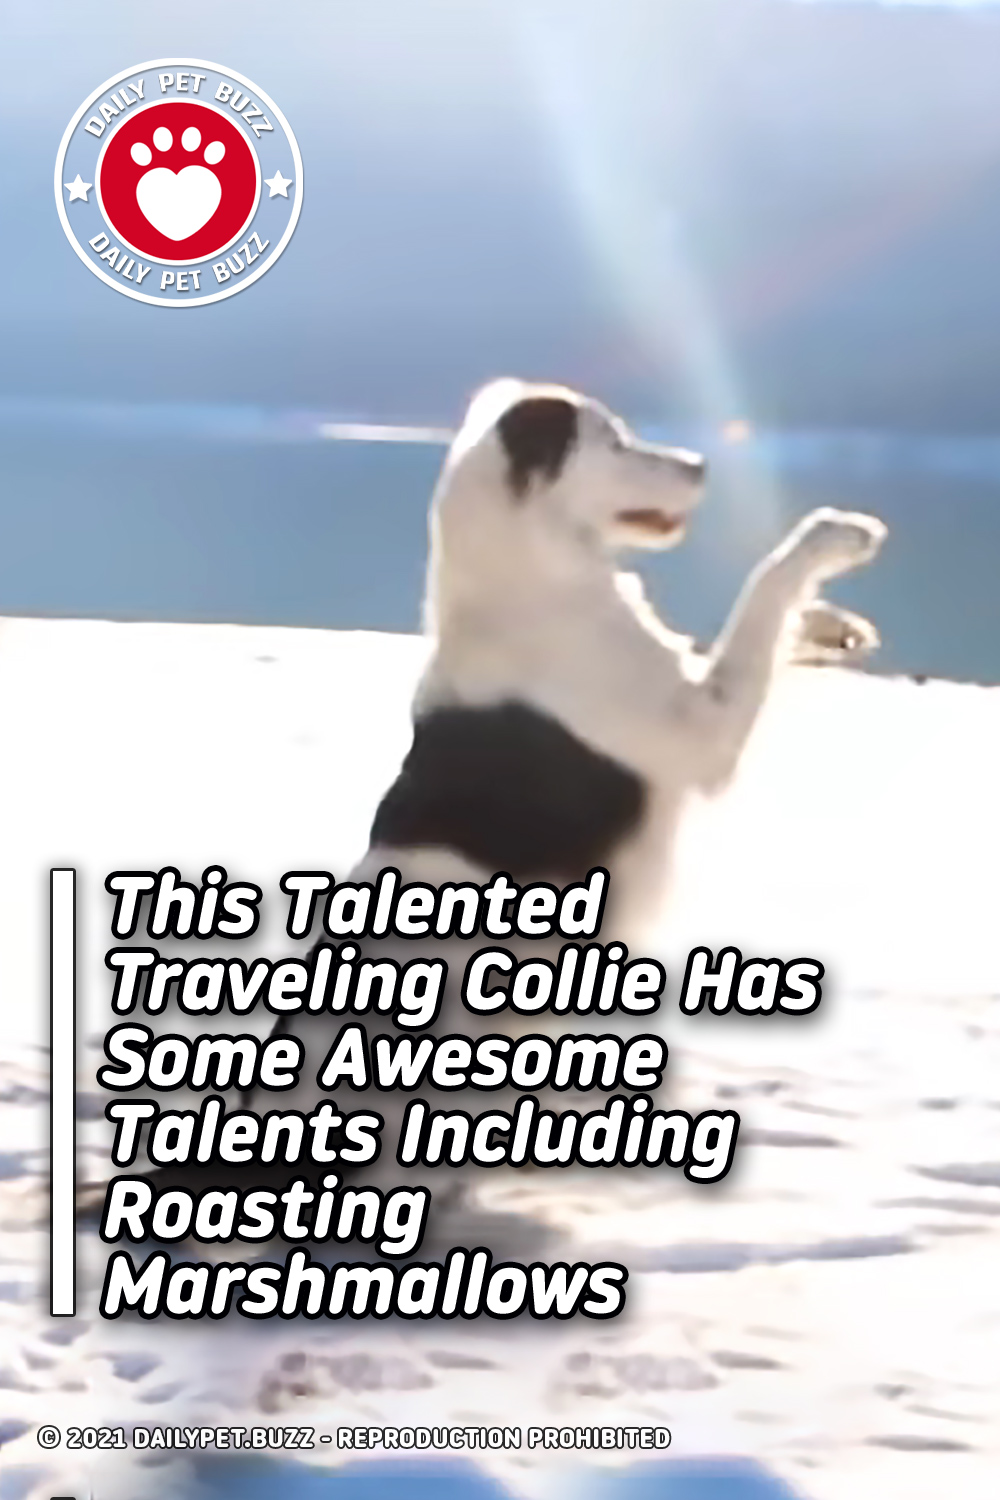 This Talented Traveling Collie Has Some Awesome Talents Including Roasting Marshmallows